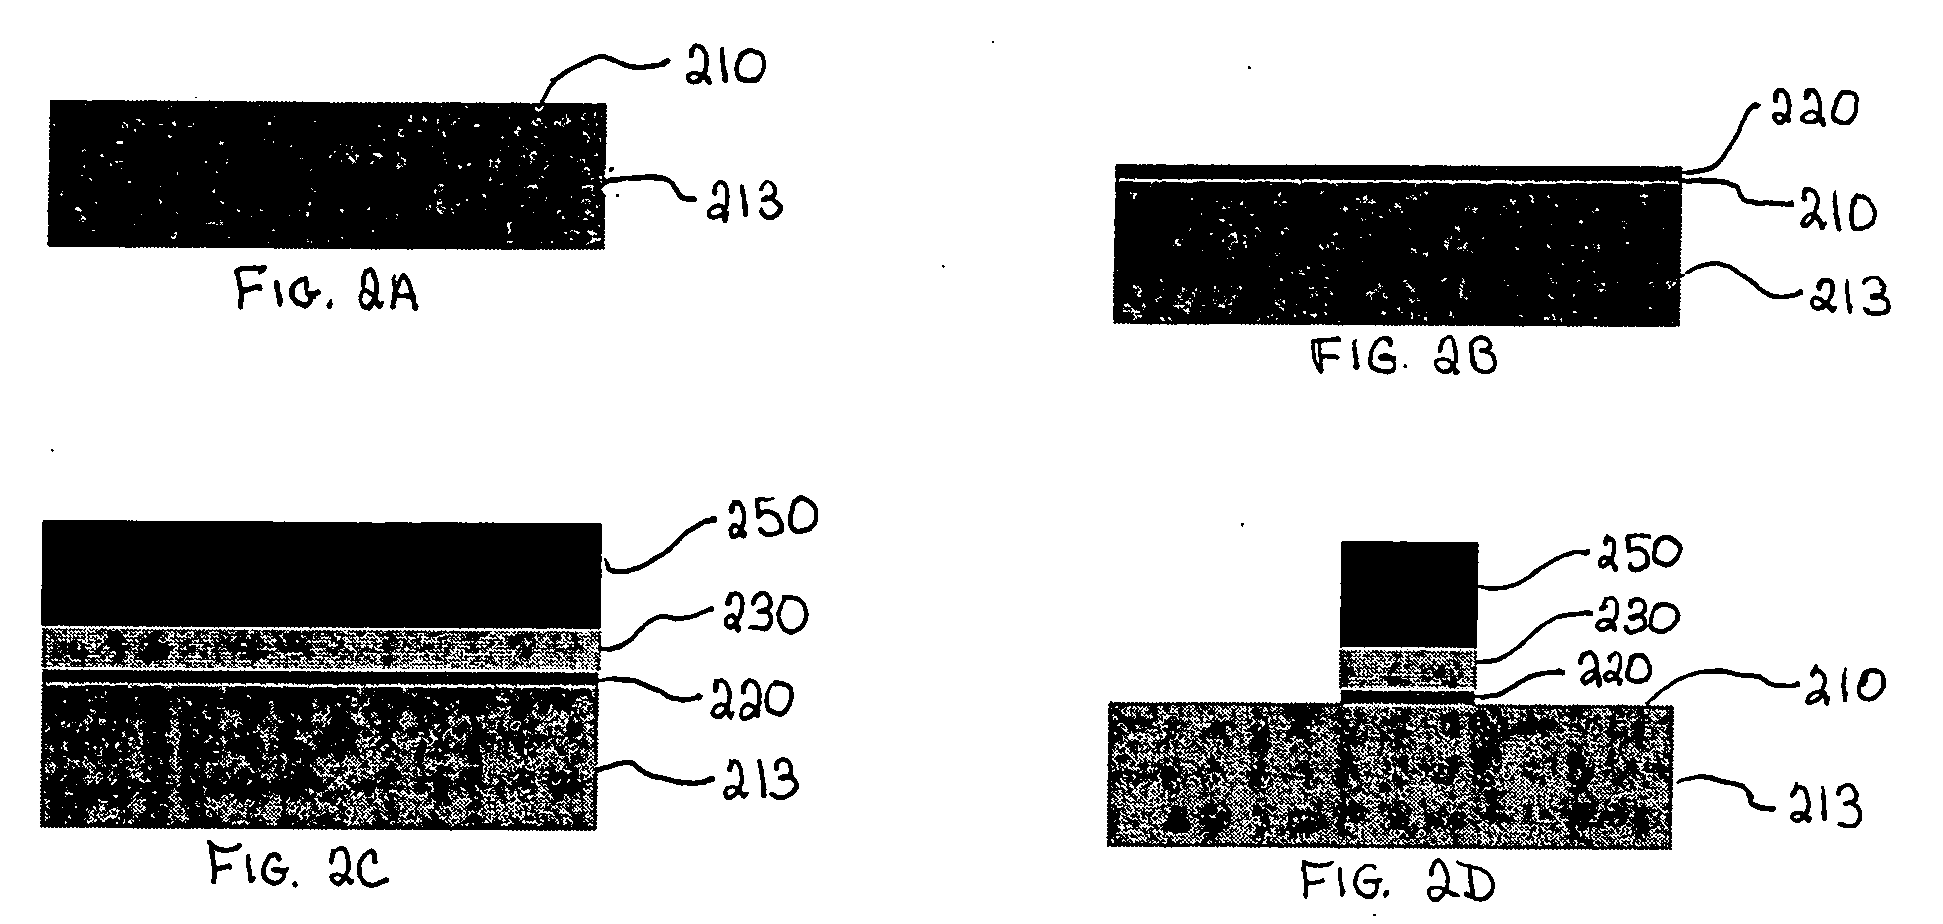 Method for forming an interface between germanium and other materials